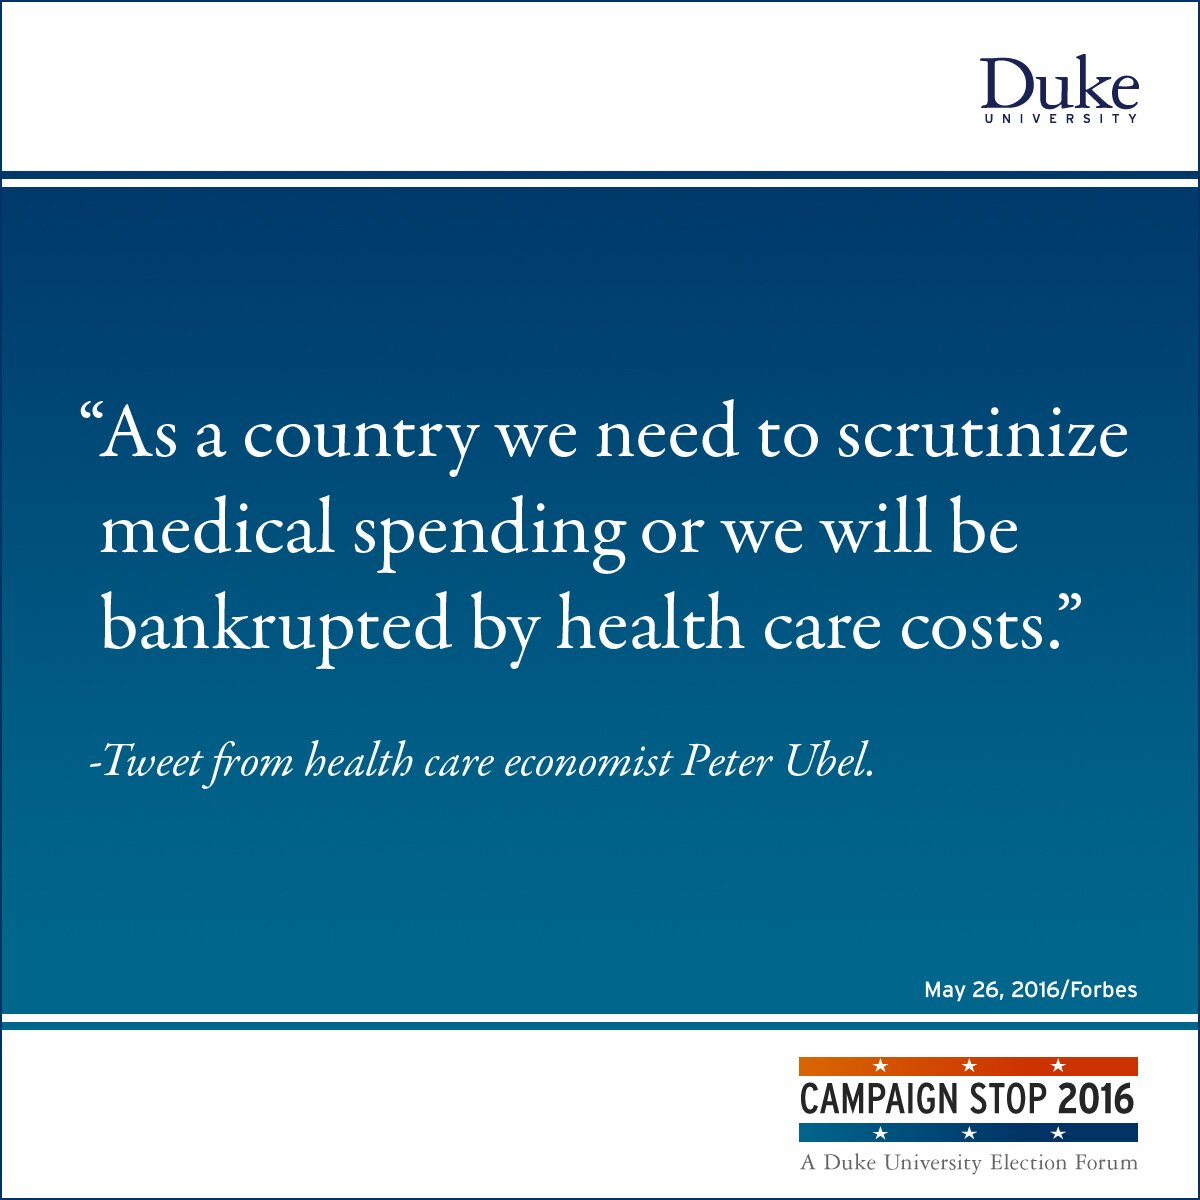 “As a country we need to scrutinize medical spending or we will be bankrupted by health care costs.” -Tweet from health care economist Peter Ubel.